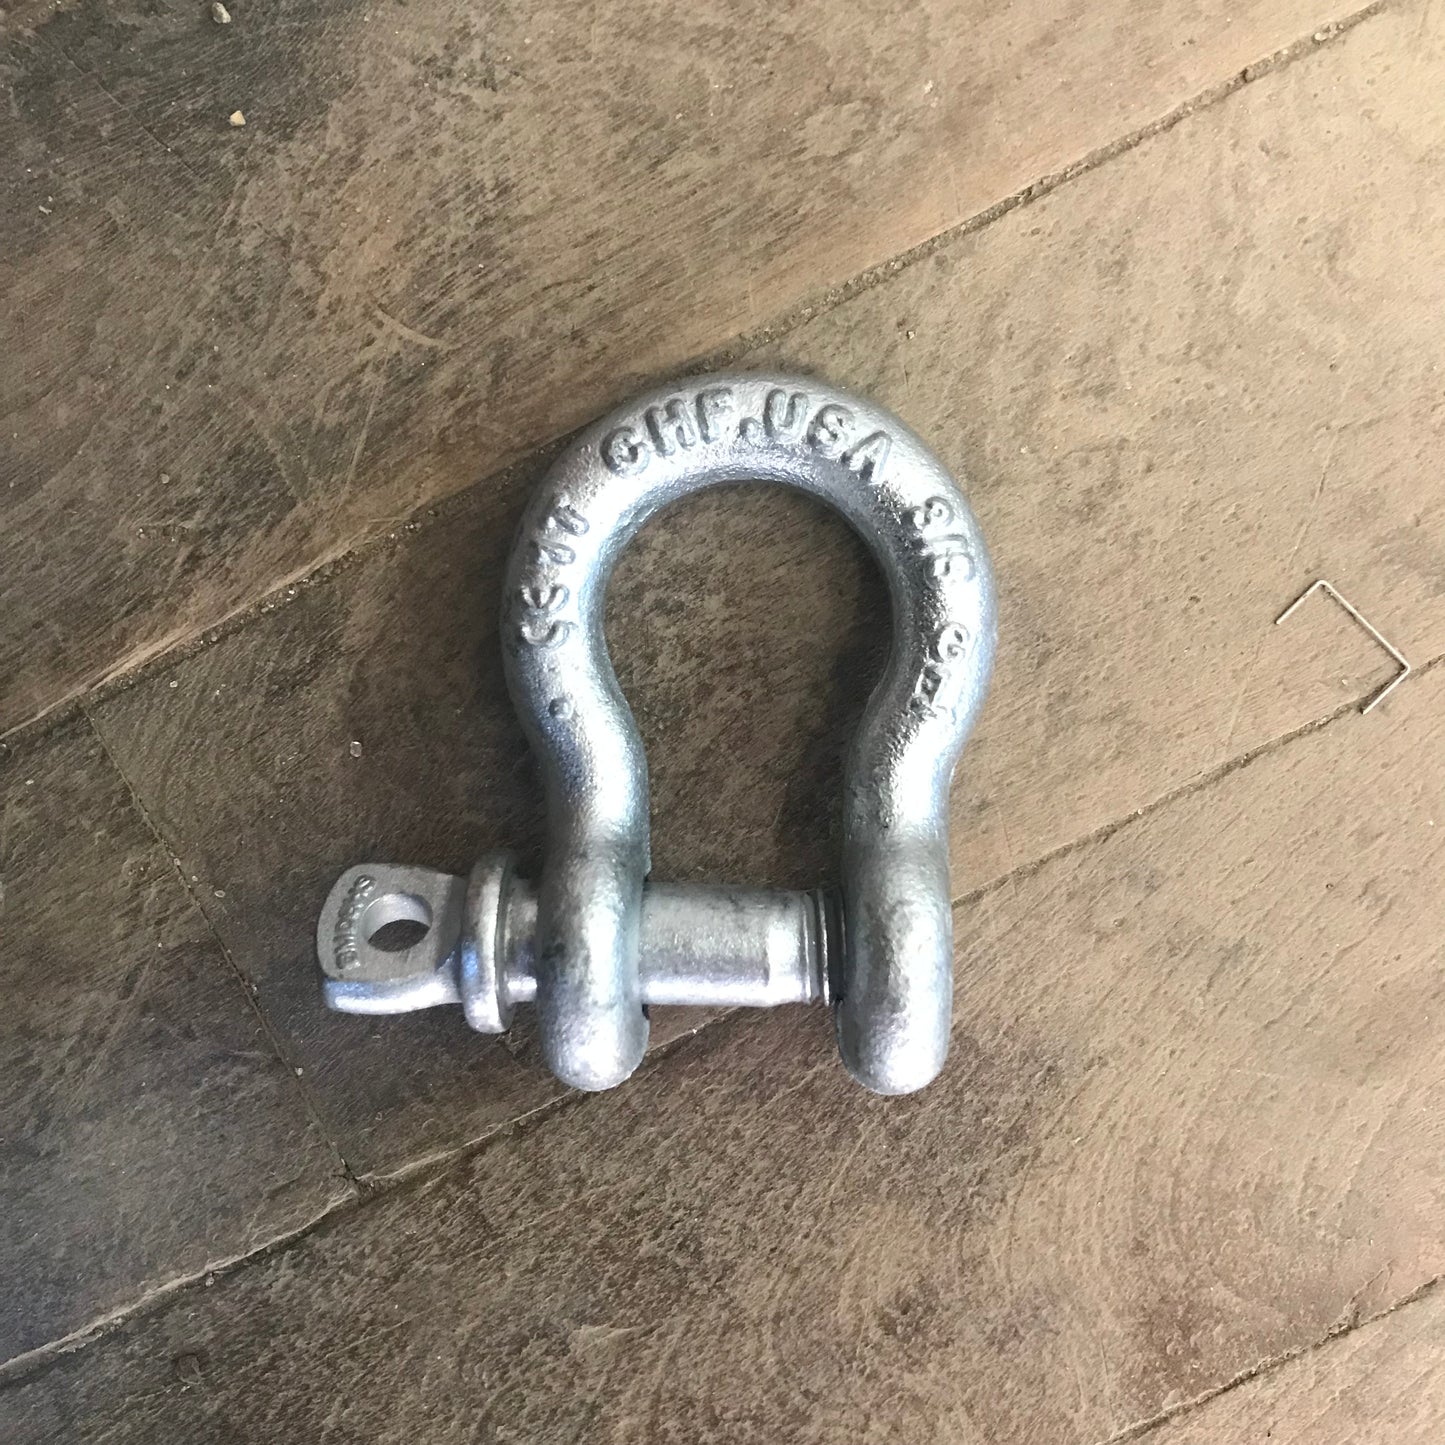 Chicago Hardware 3/8" Galvanized Anchor Screw Pin Shackle (20120-9)